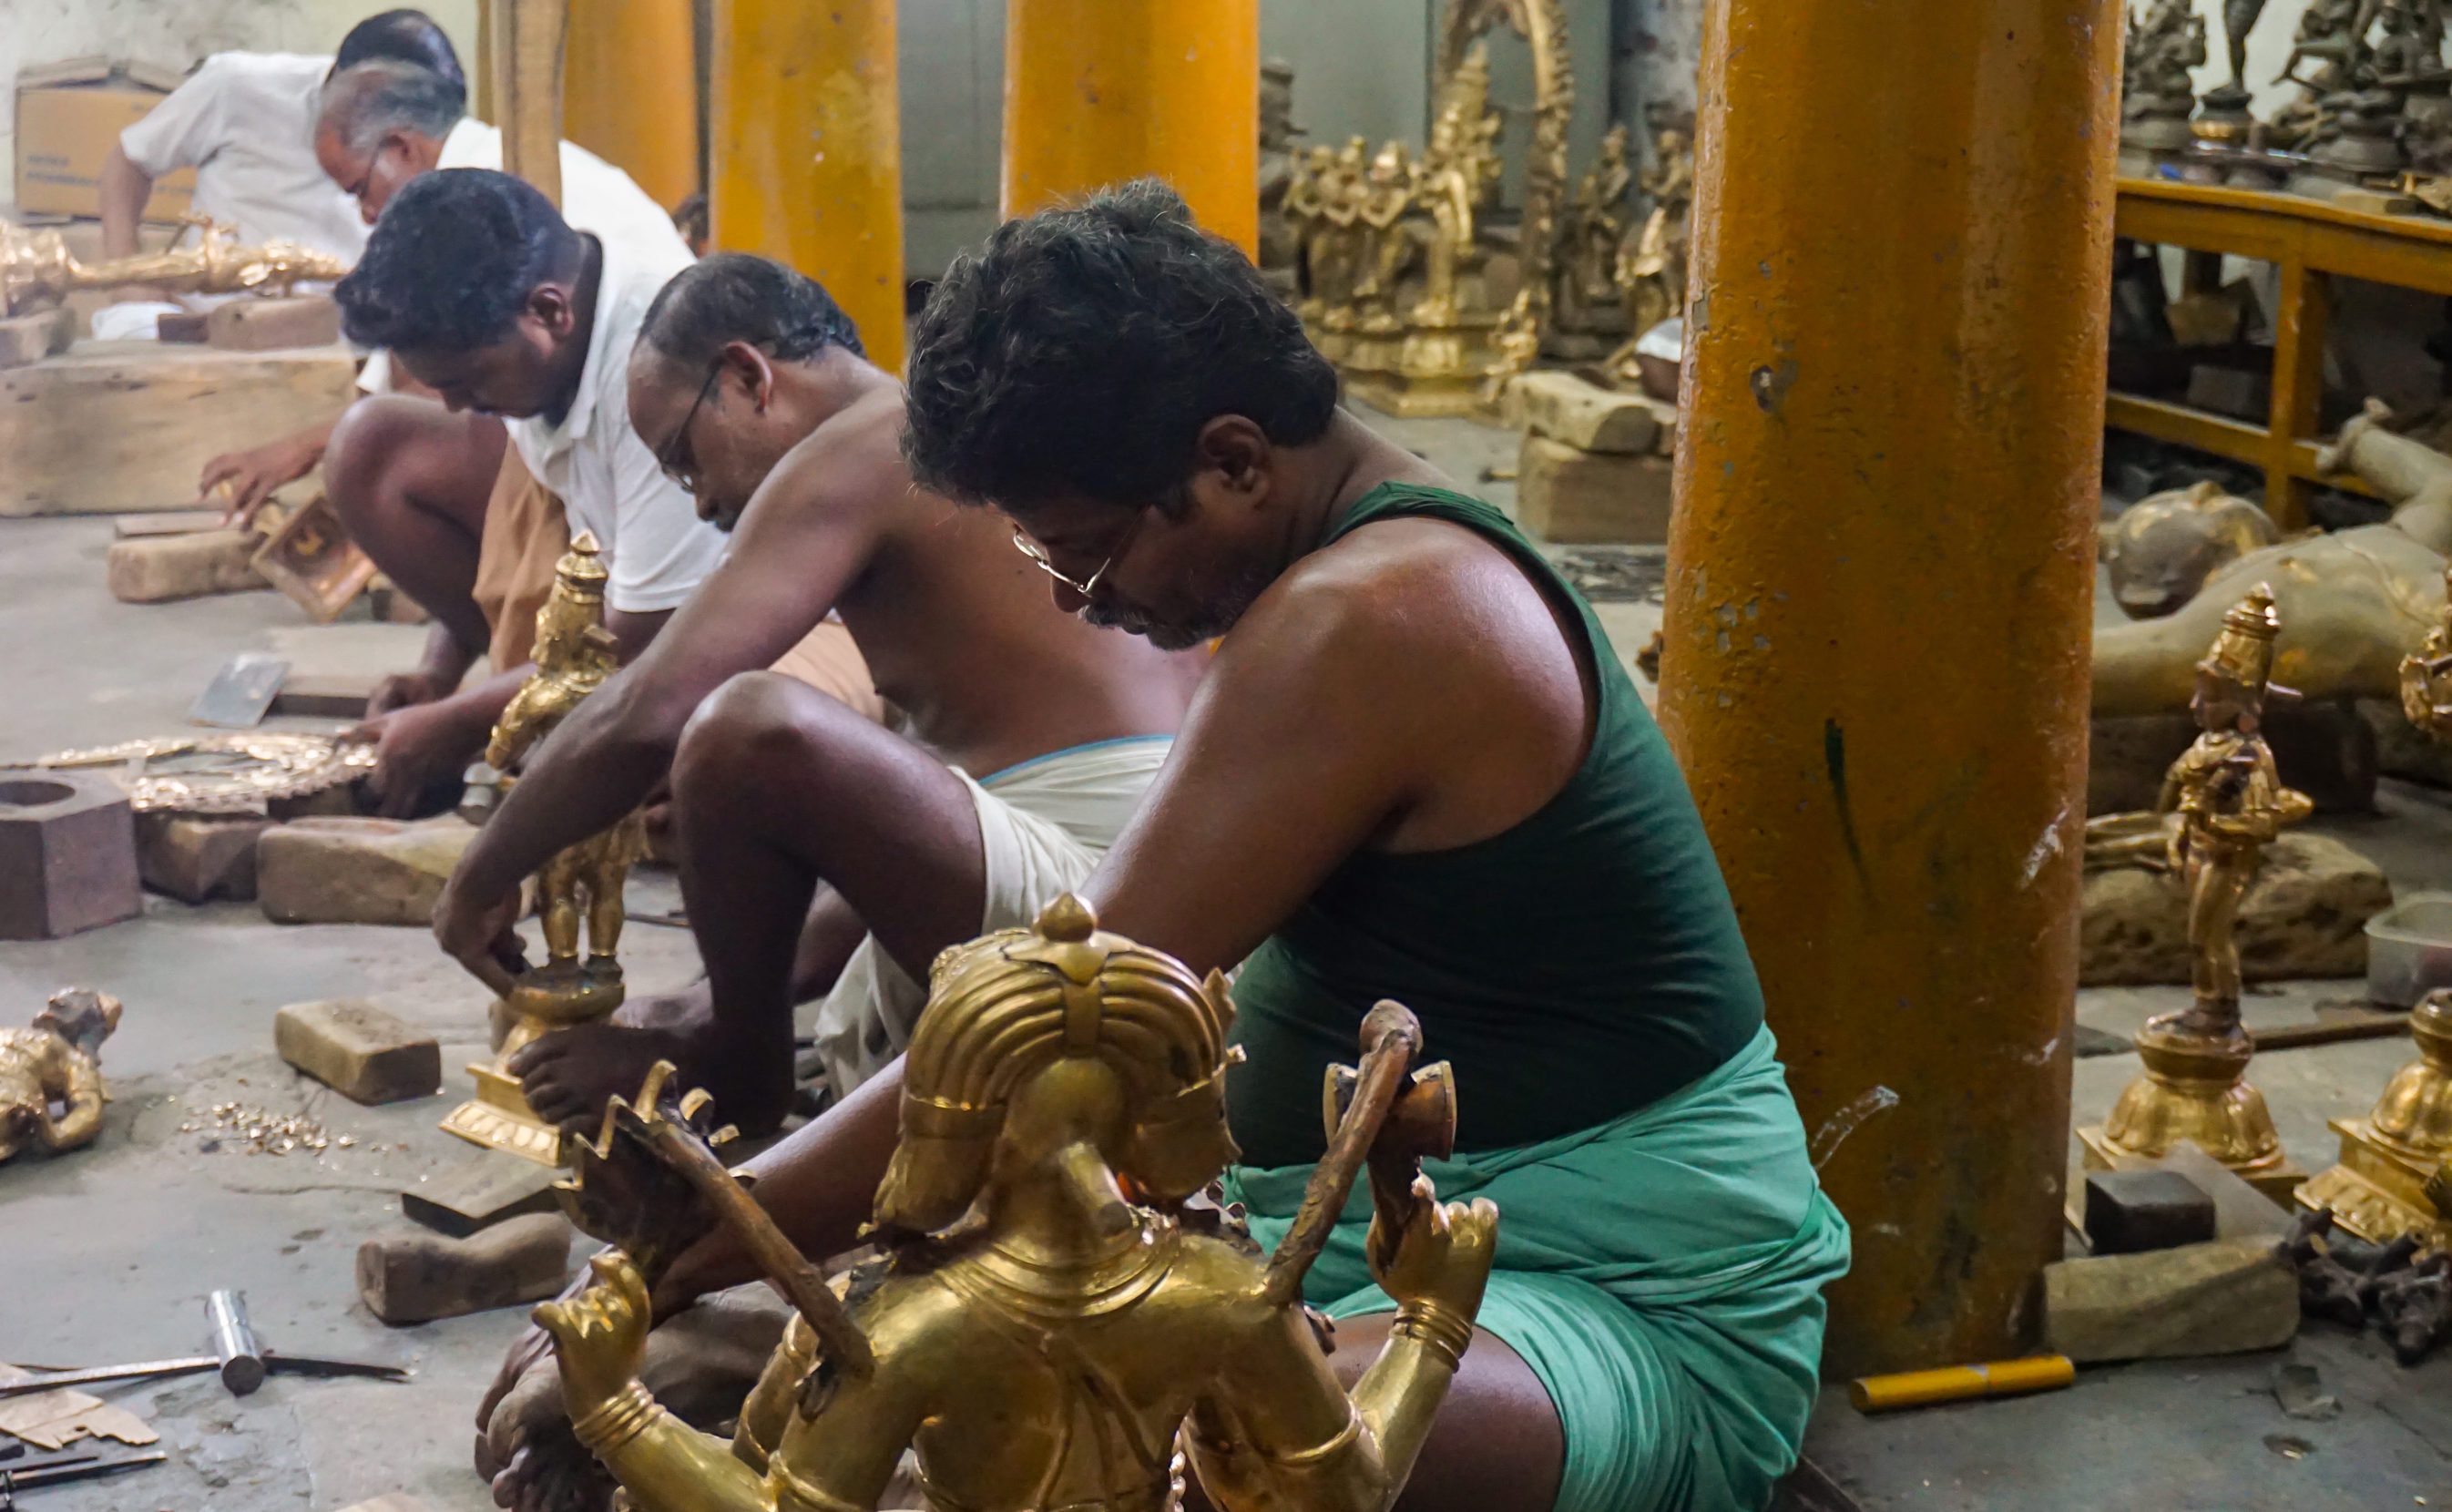 Working on the floor of a heritage foundry in Swamimalai, craftsmen cast panchaloha idols by hand and carry on the “lost wax” tradition mastered during the Chola empire. Photo: Meenakshi J.